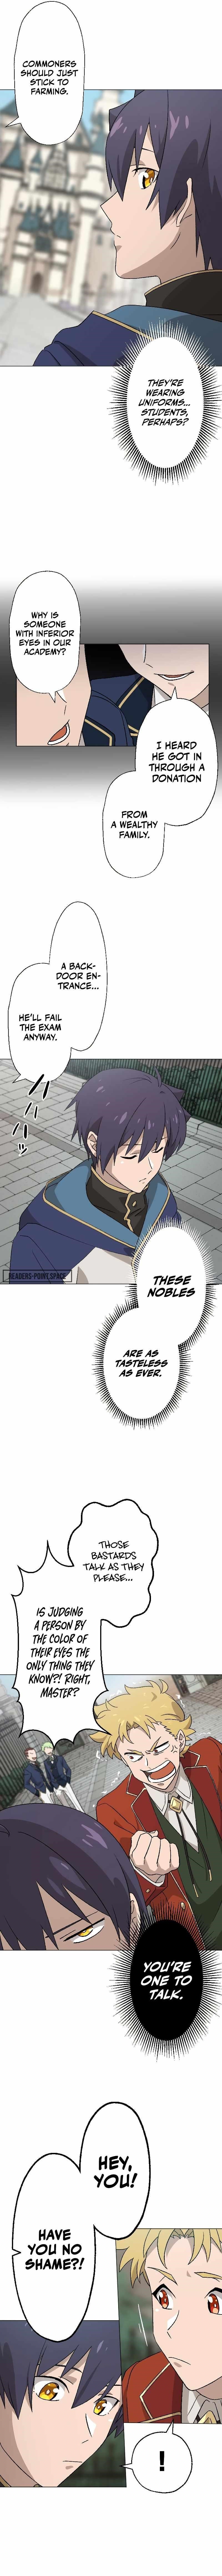 The Reincarnated Magician With Inferior Eyes ~The Oppressed Ex-hero Survives the Future World With Ease~ Chapter 9 - Page 4